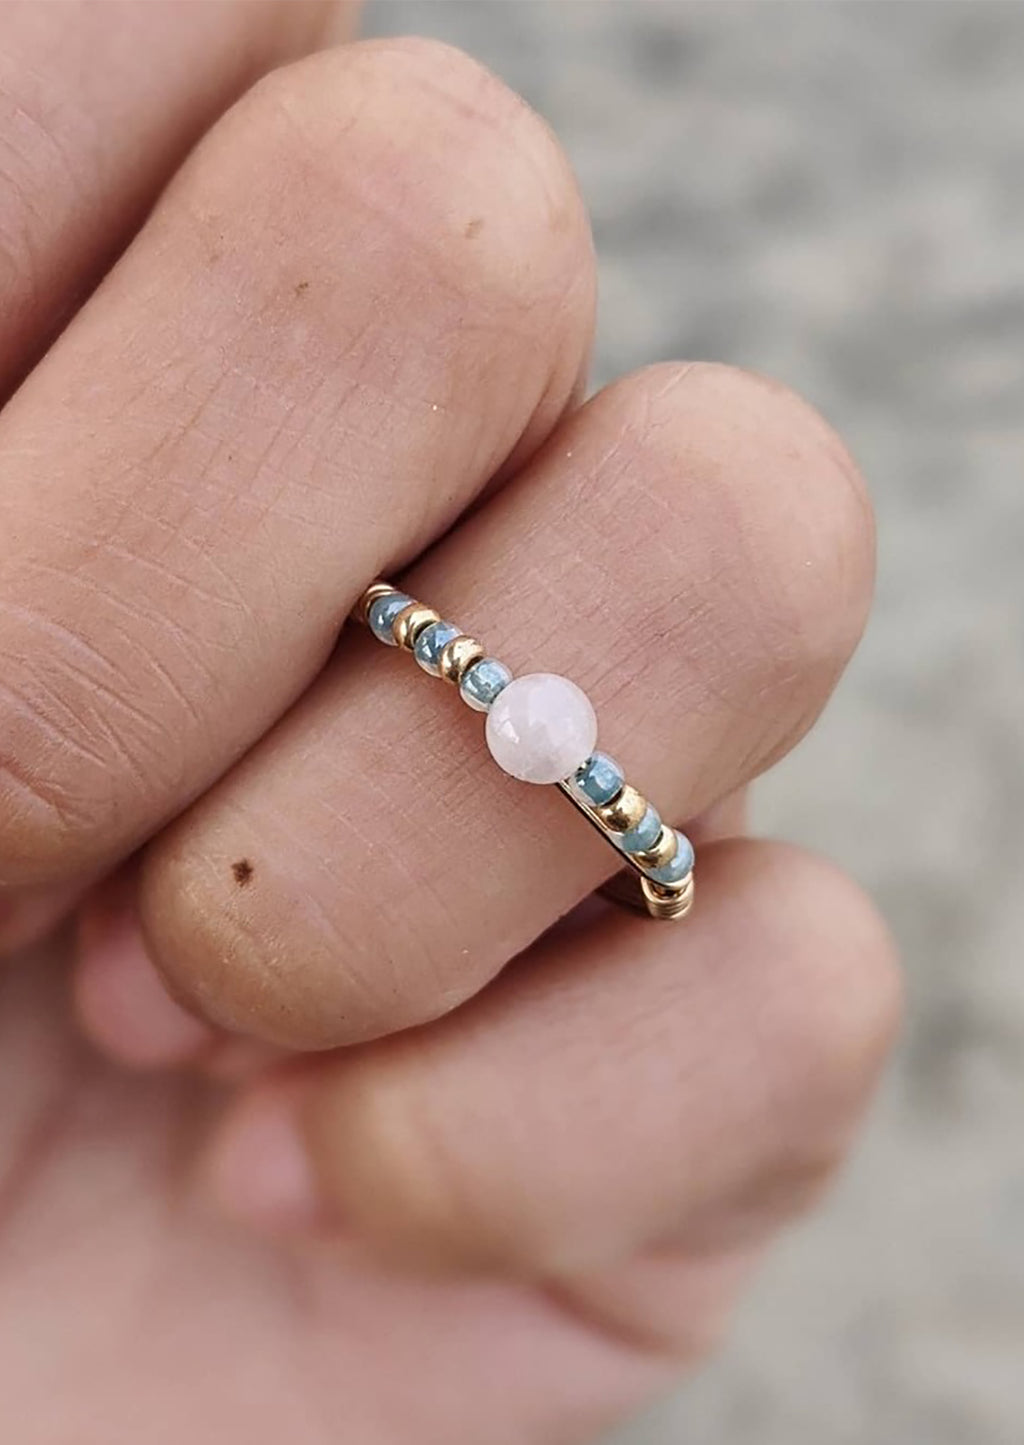 2: A gold wire ring with blue and pink beads.